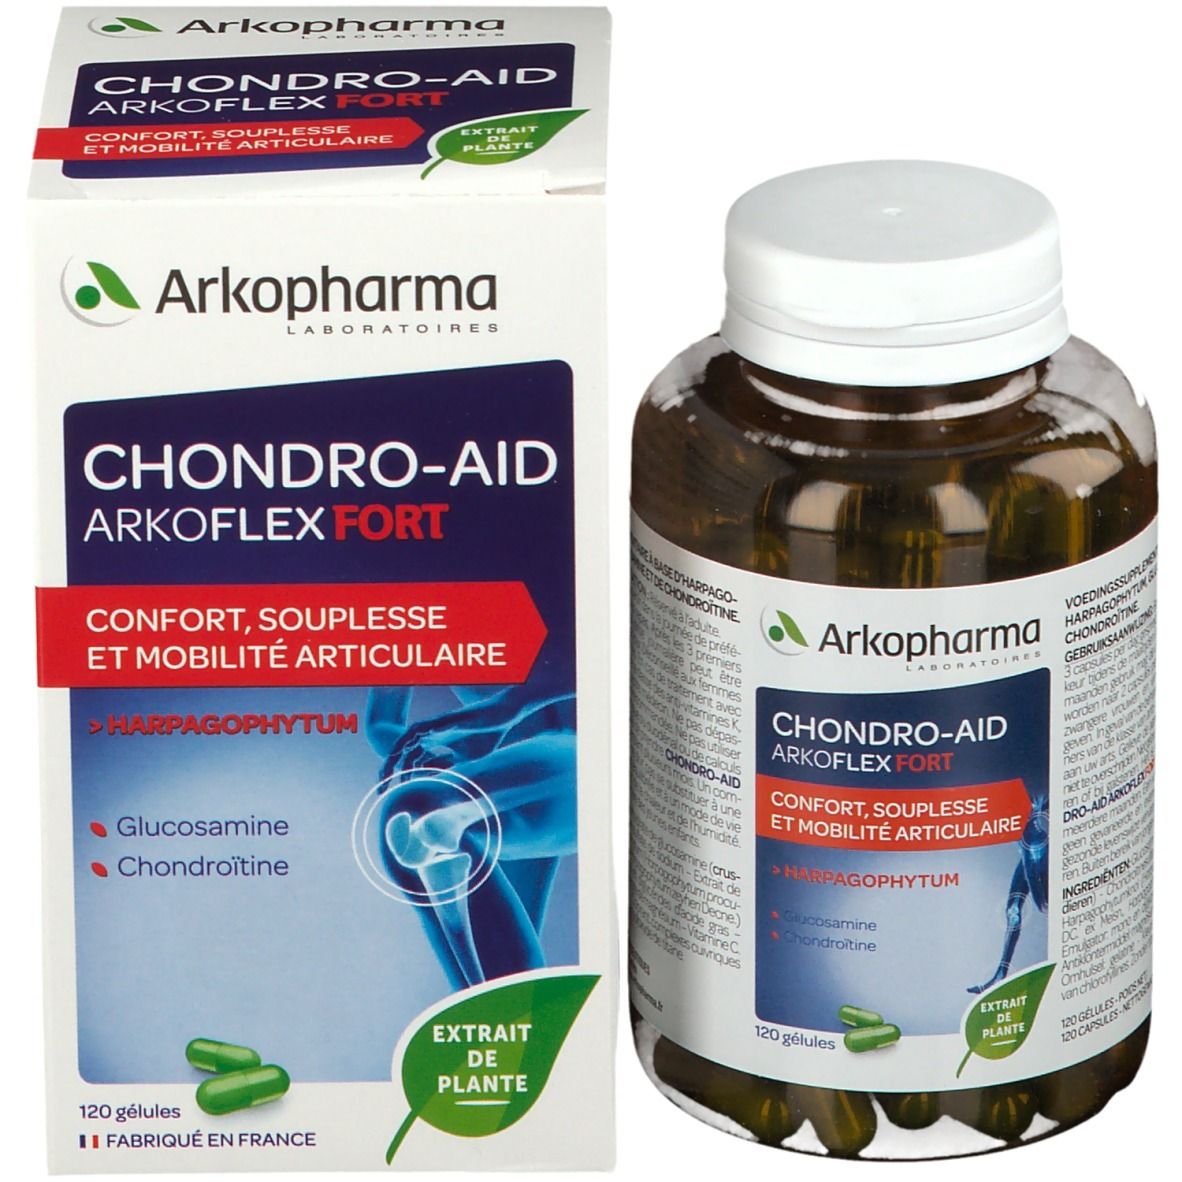 Chondro-Aid Arkoflex Forte